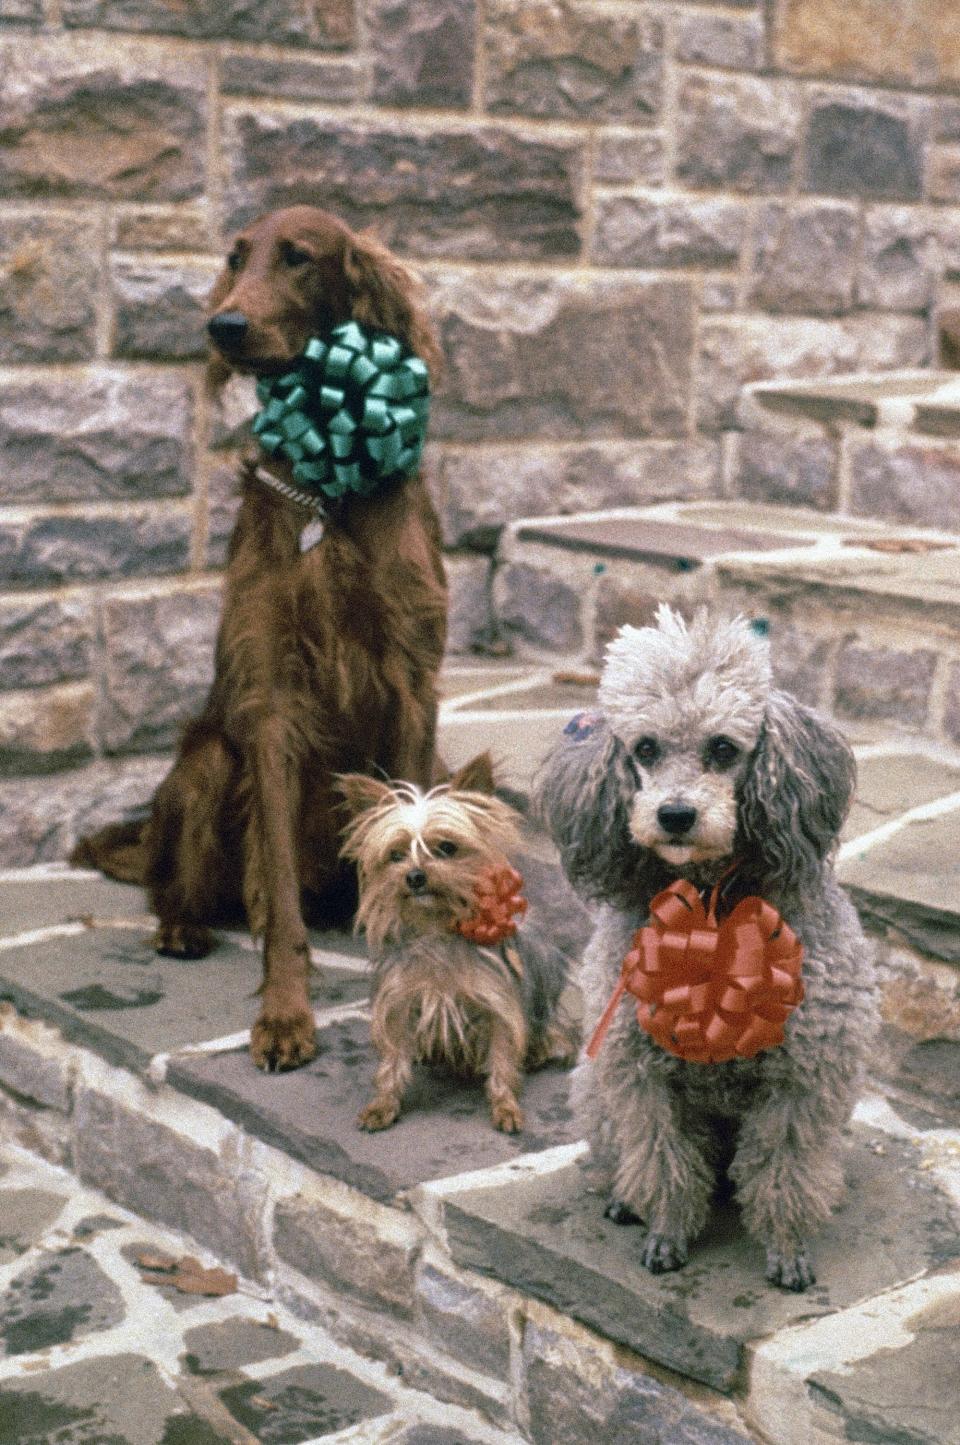 Richard Nixon's three dogs pose on a set of steps in 1972.